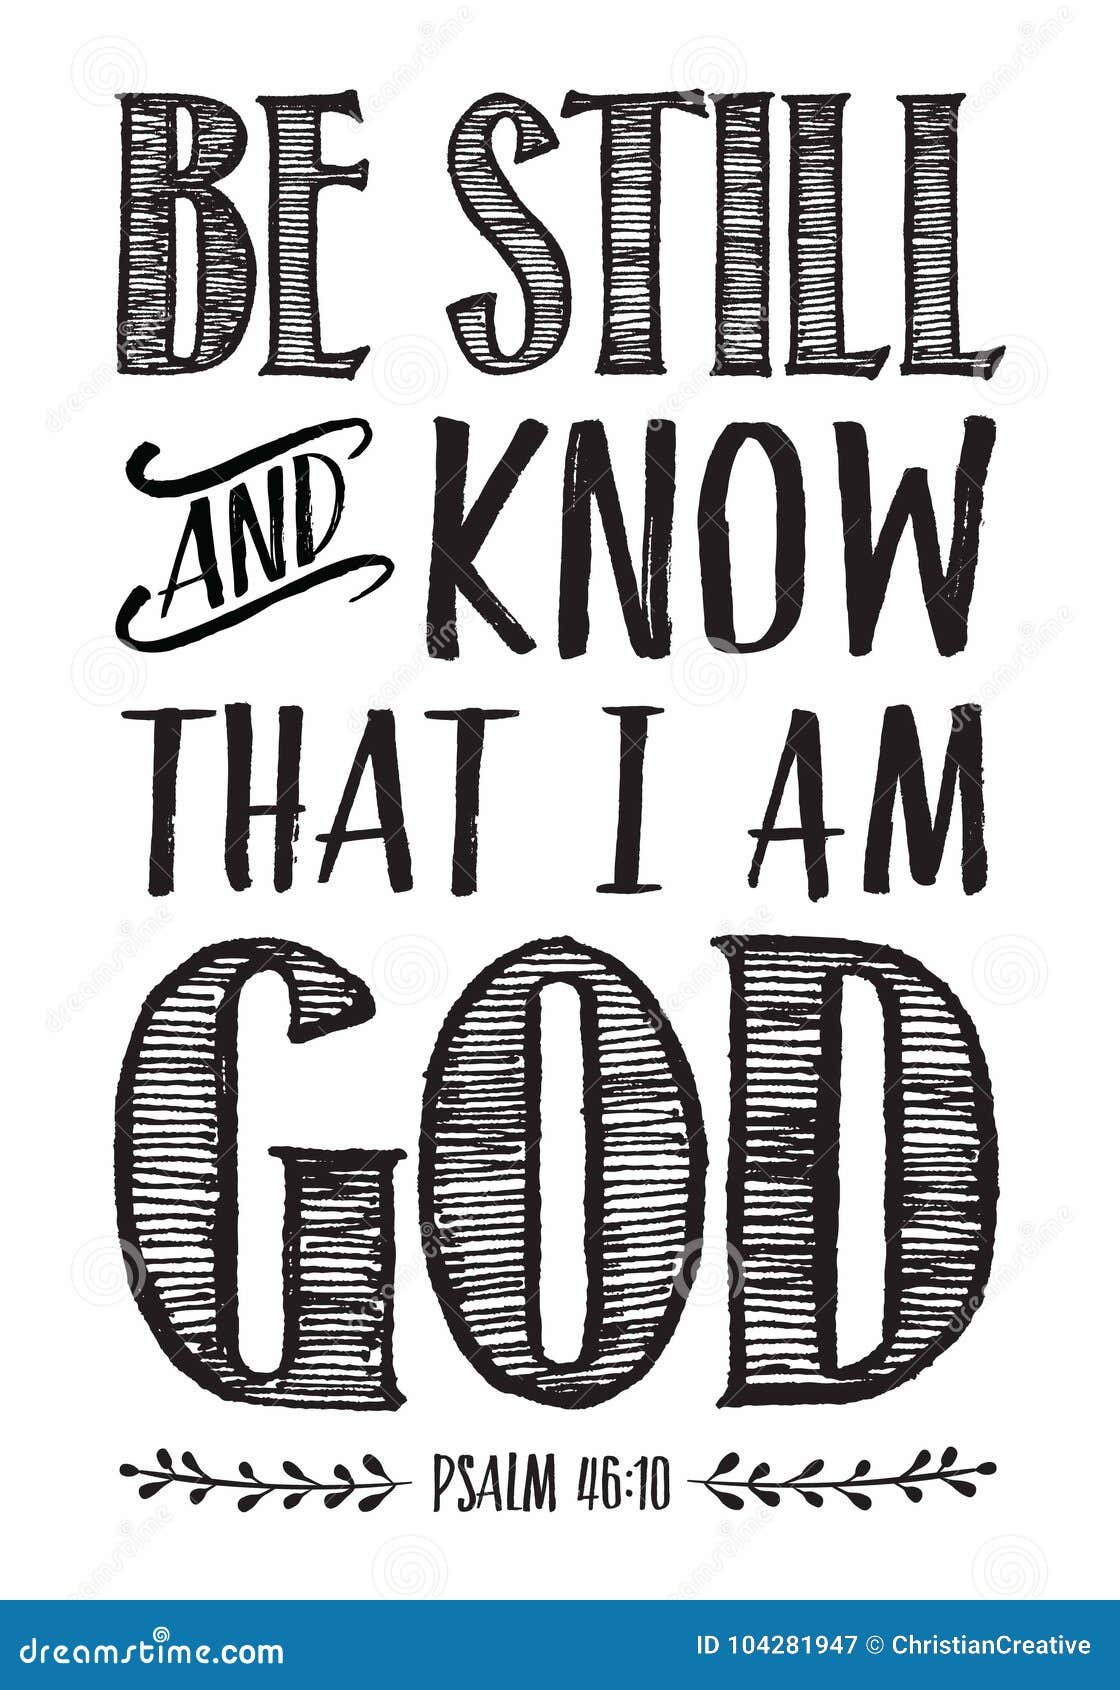 Be Still And Know That I Am God Typography Printable Stock Vector Illustration Of Peace Christian 104281947